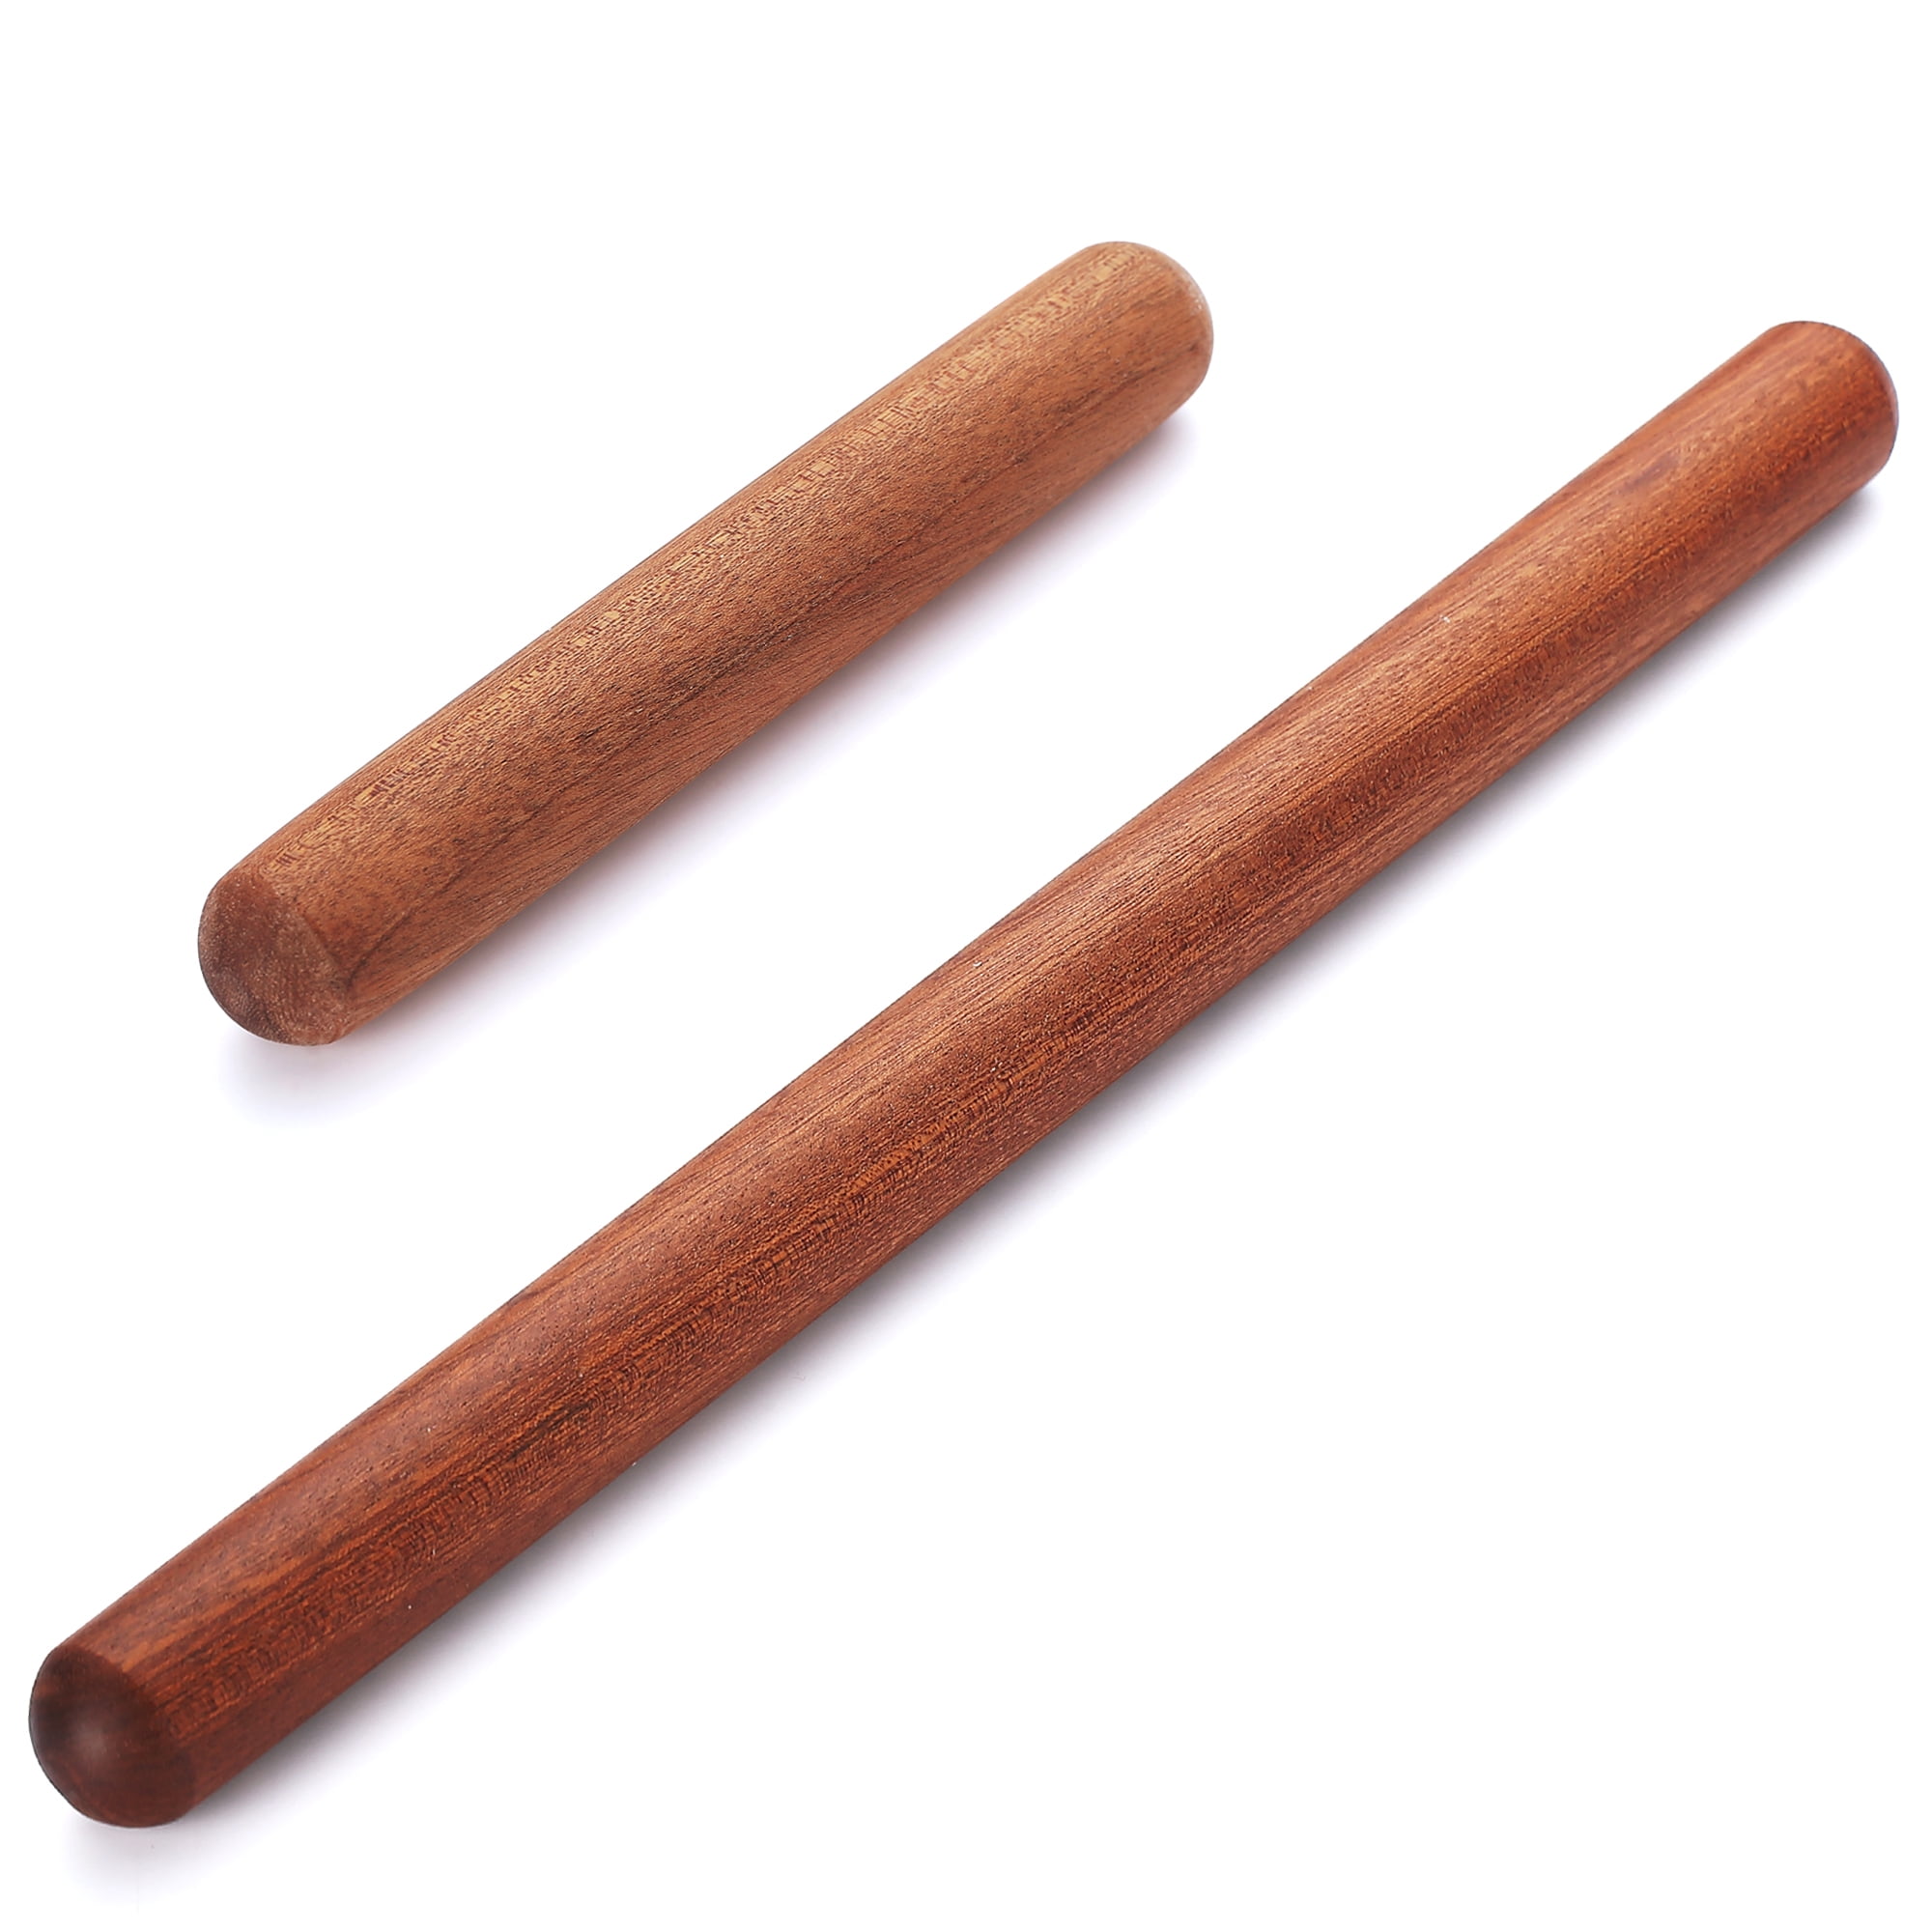  KITEISCAT Acacia Wooden Rolling Pin for Baking